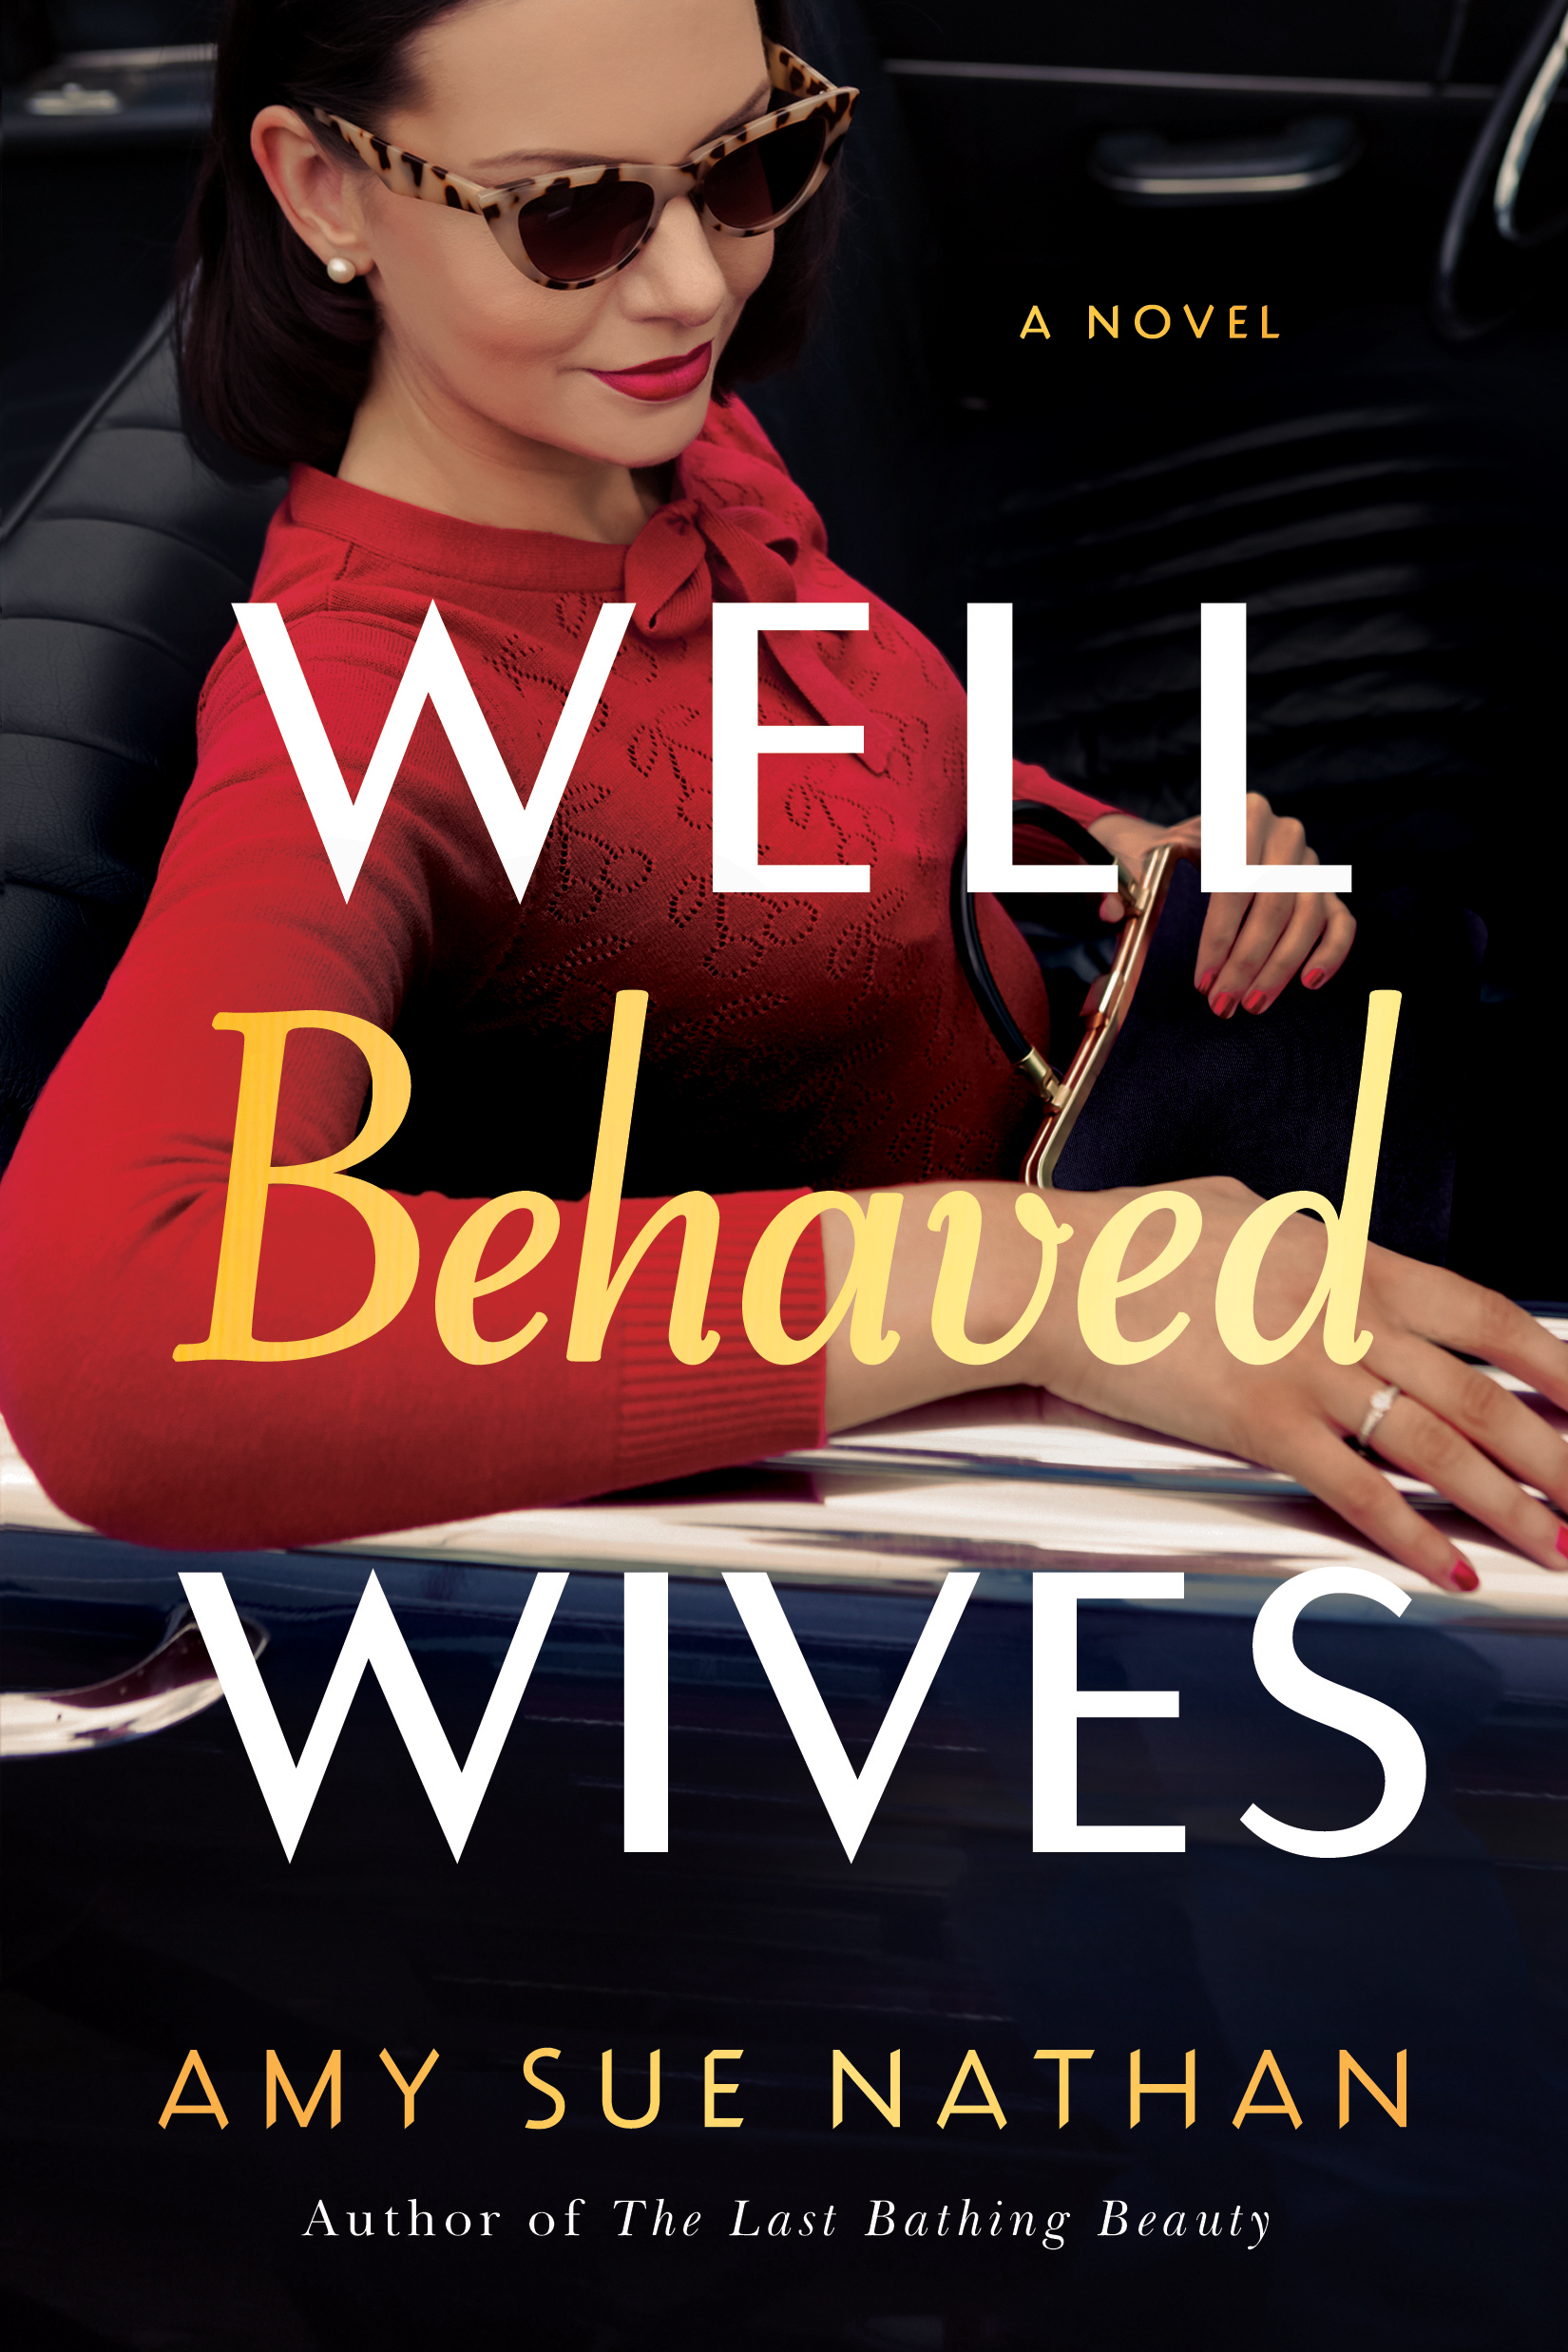 Well Behaved Wives by Amy Sue Nathan PDF Download